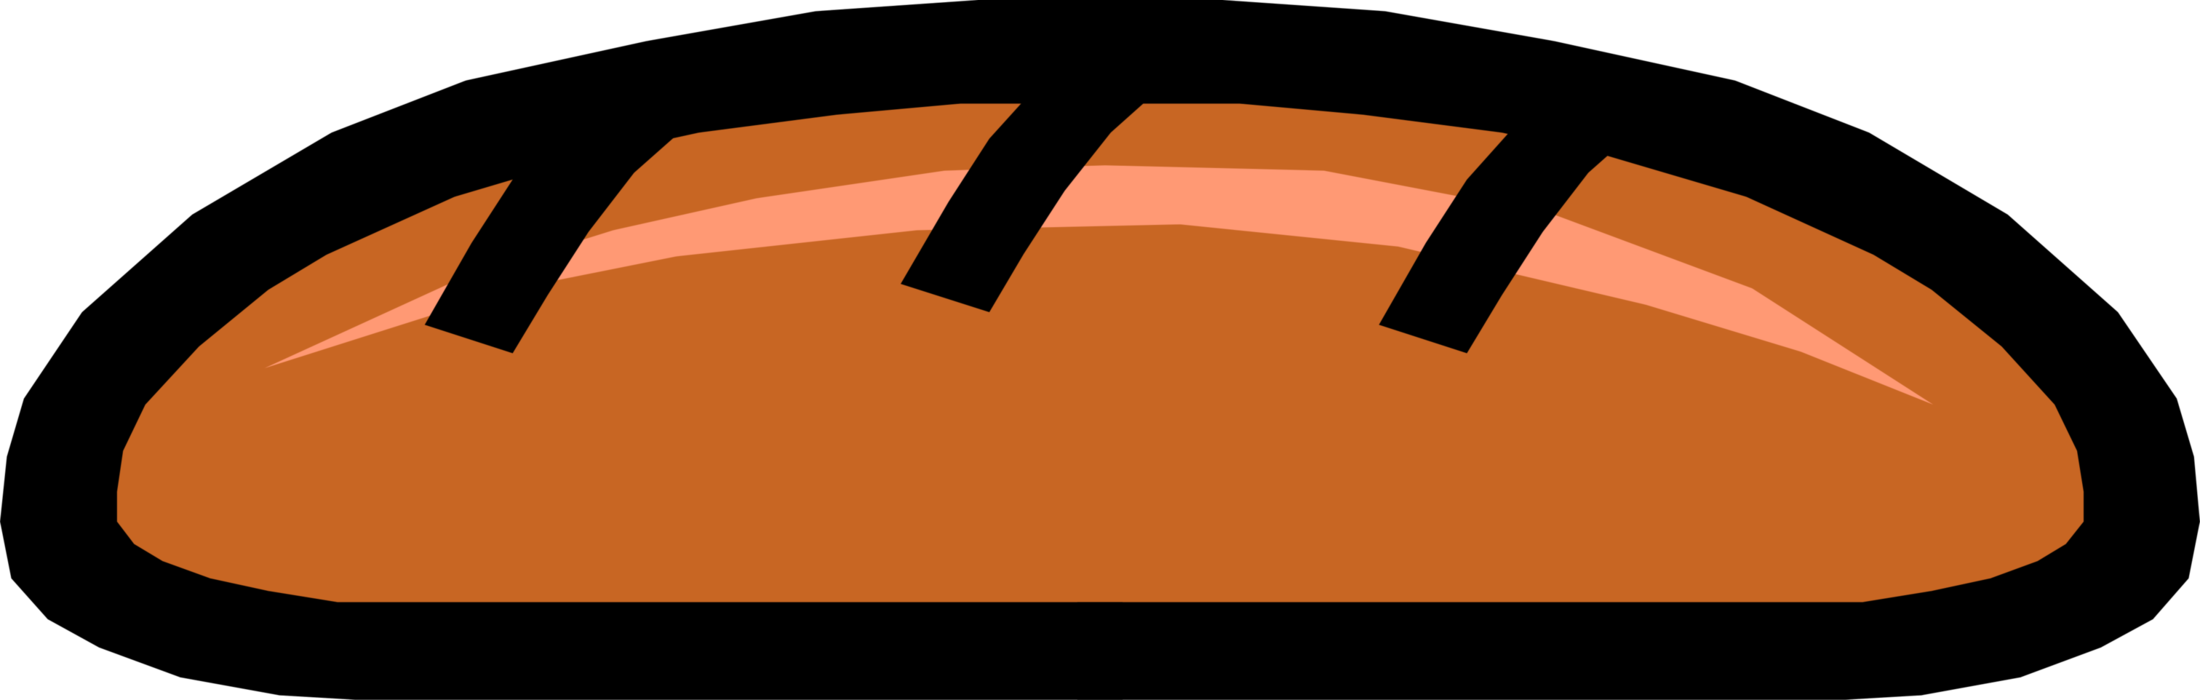 Vector Illustration of Bakery Baked Loaf of Bread Staple Food